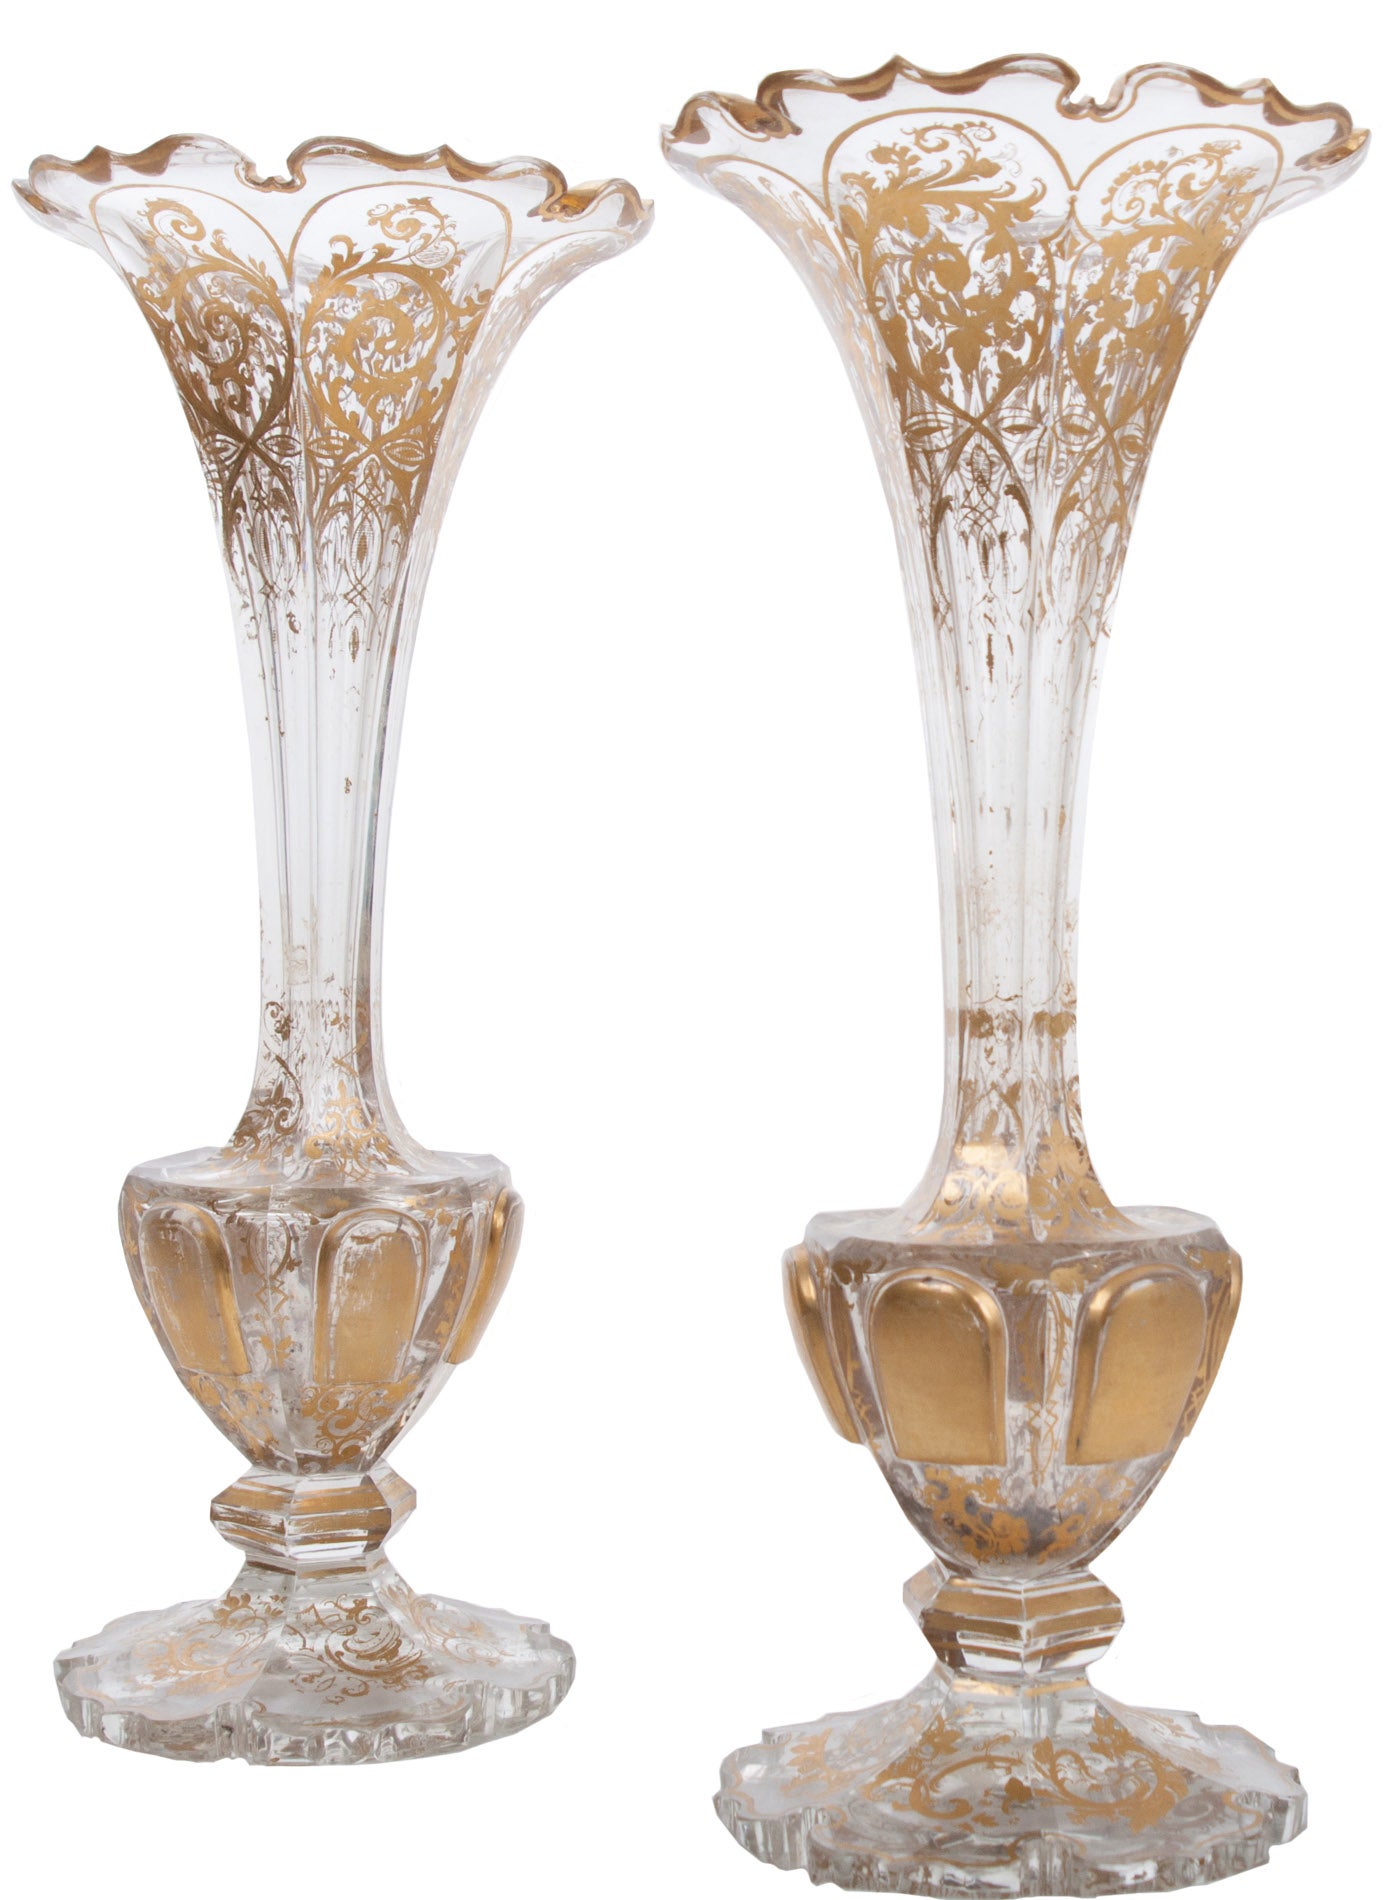 Italian Pair of 19th Century Crystal and Gilt Vases